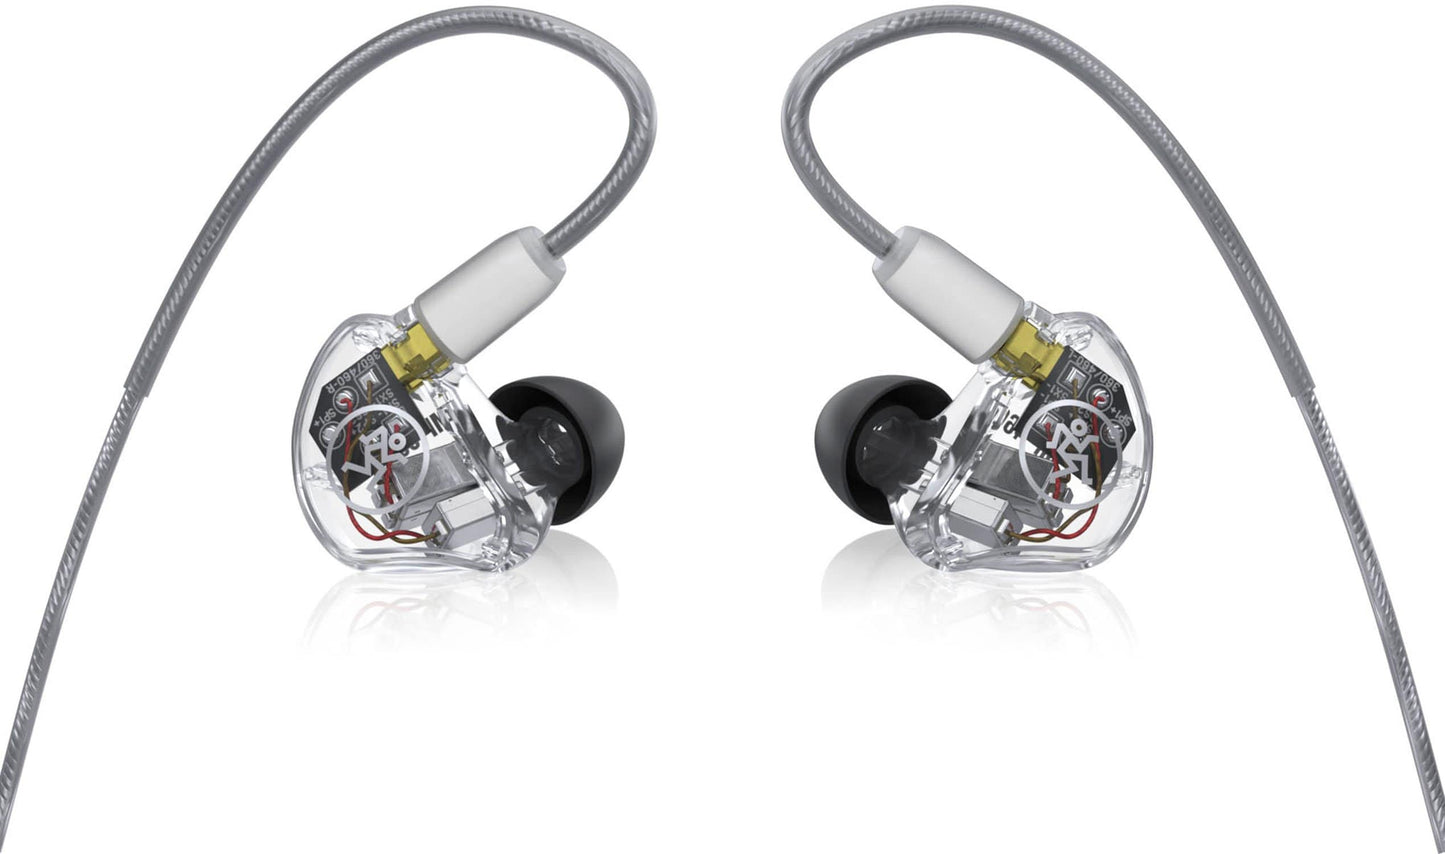 Mackie MP-460 Quad Balanced Armature In-Ear Monitors - PSSL ProSound and Stage Lighting